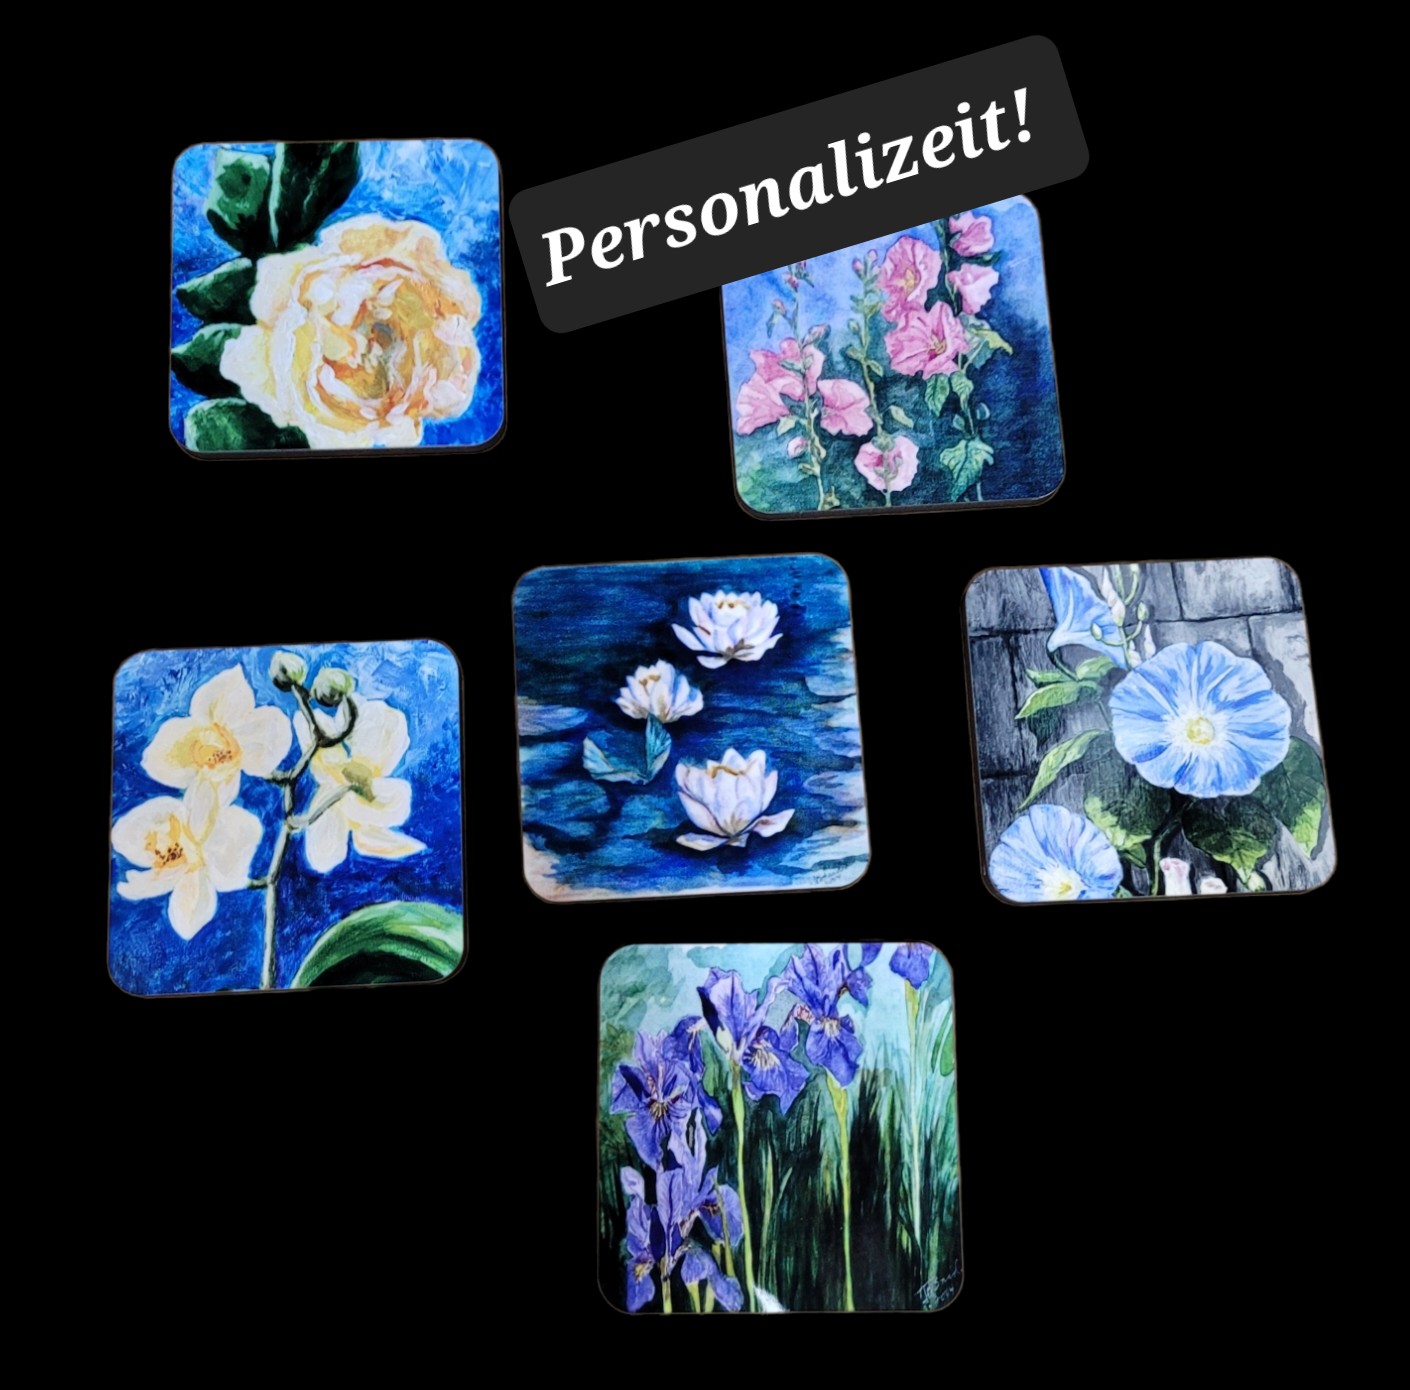 Summer Flowers made with sublimation printing